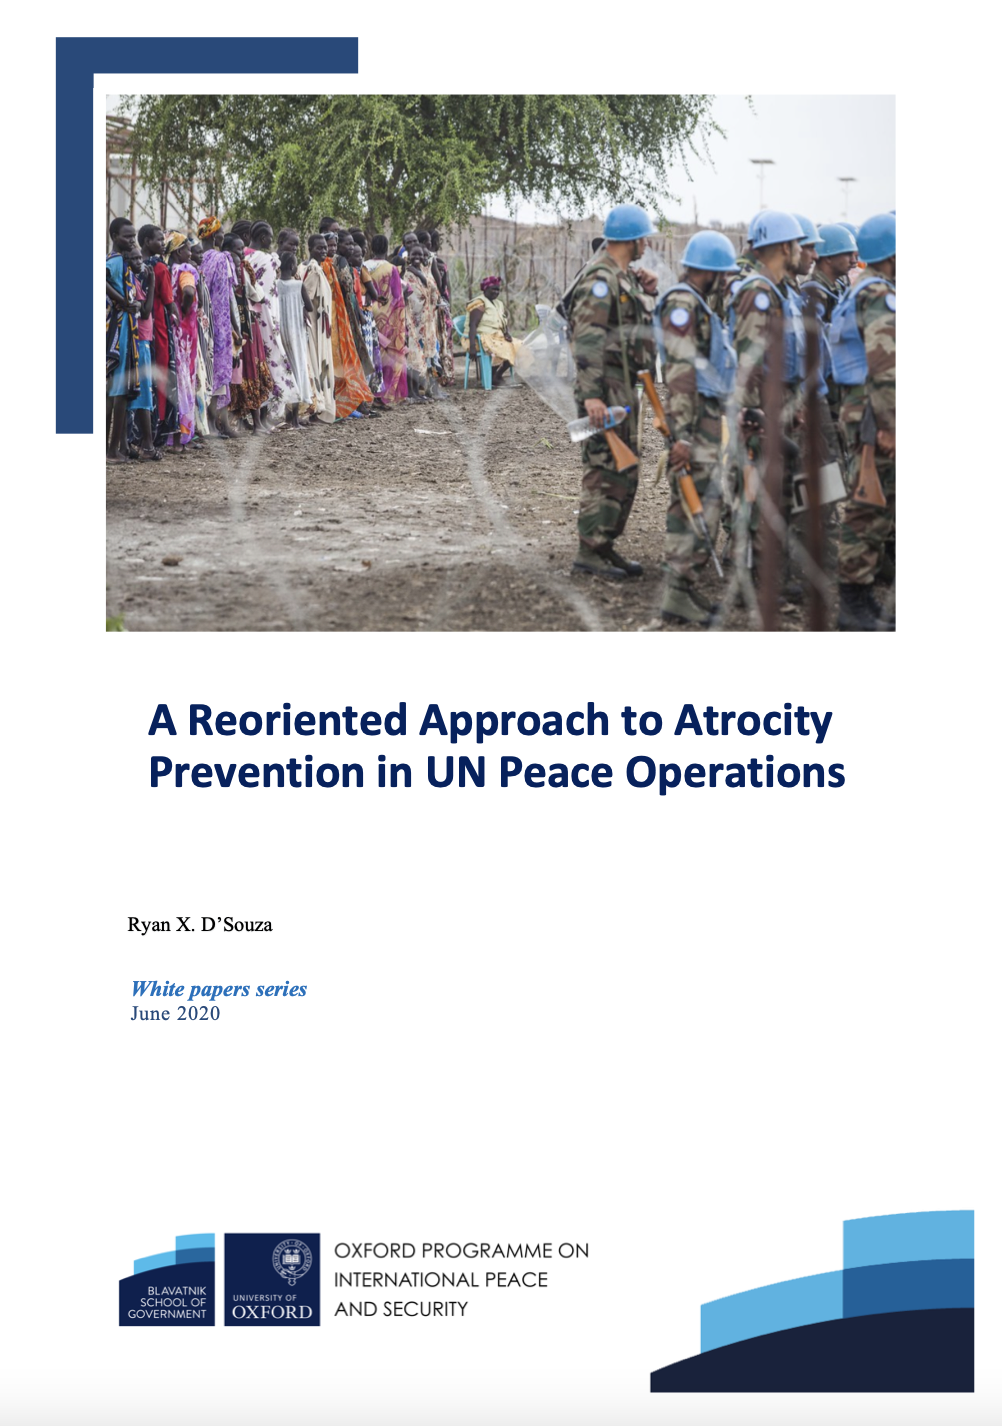 Ryan D’Souza, ‘A Reoriented Approach to Atrocity Prevention in UN Peace Operations’